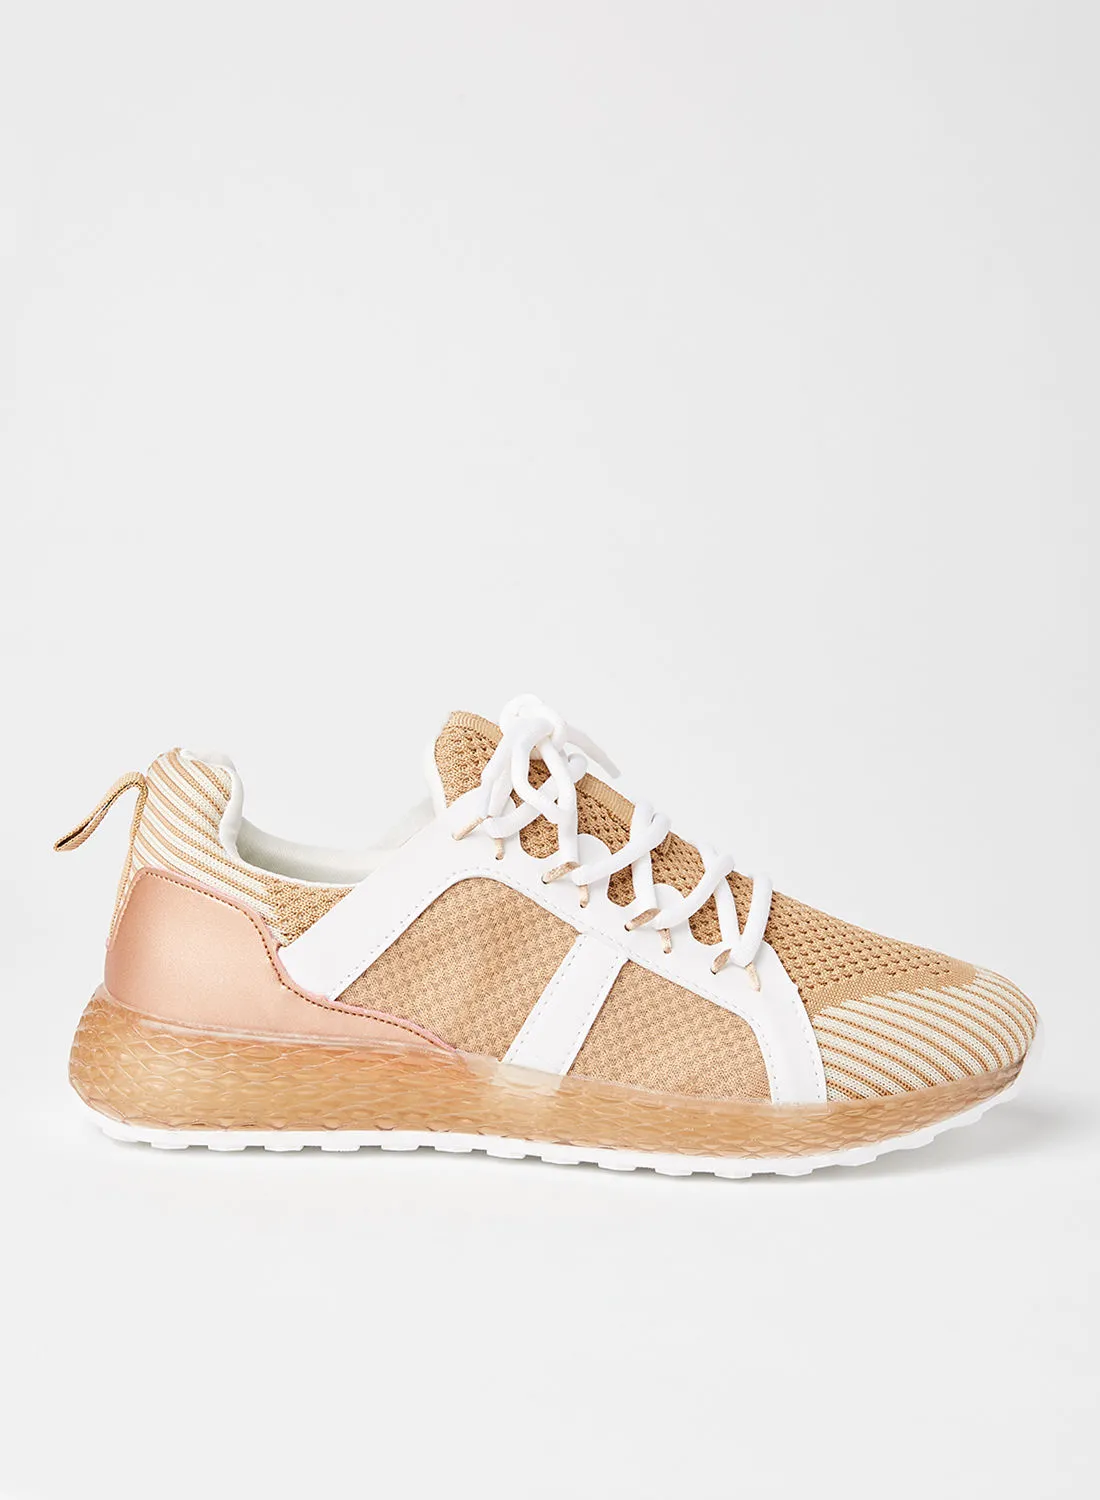 Qupid Tucson Low Top Sneakers Taupe